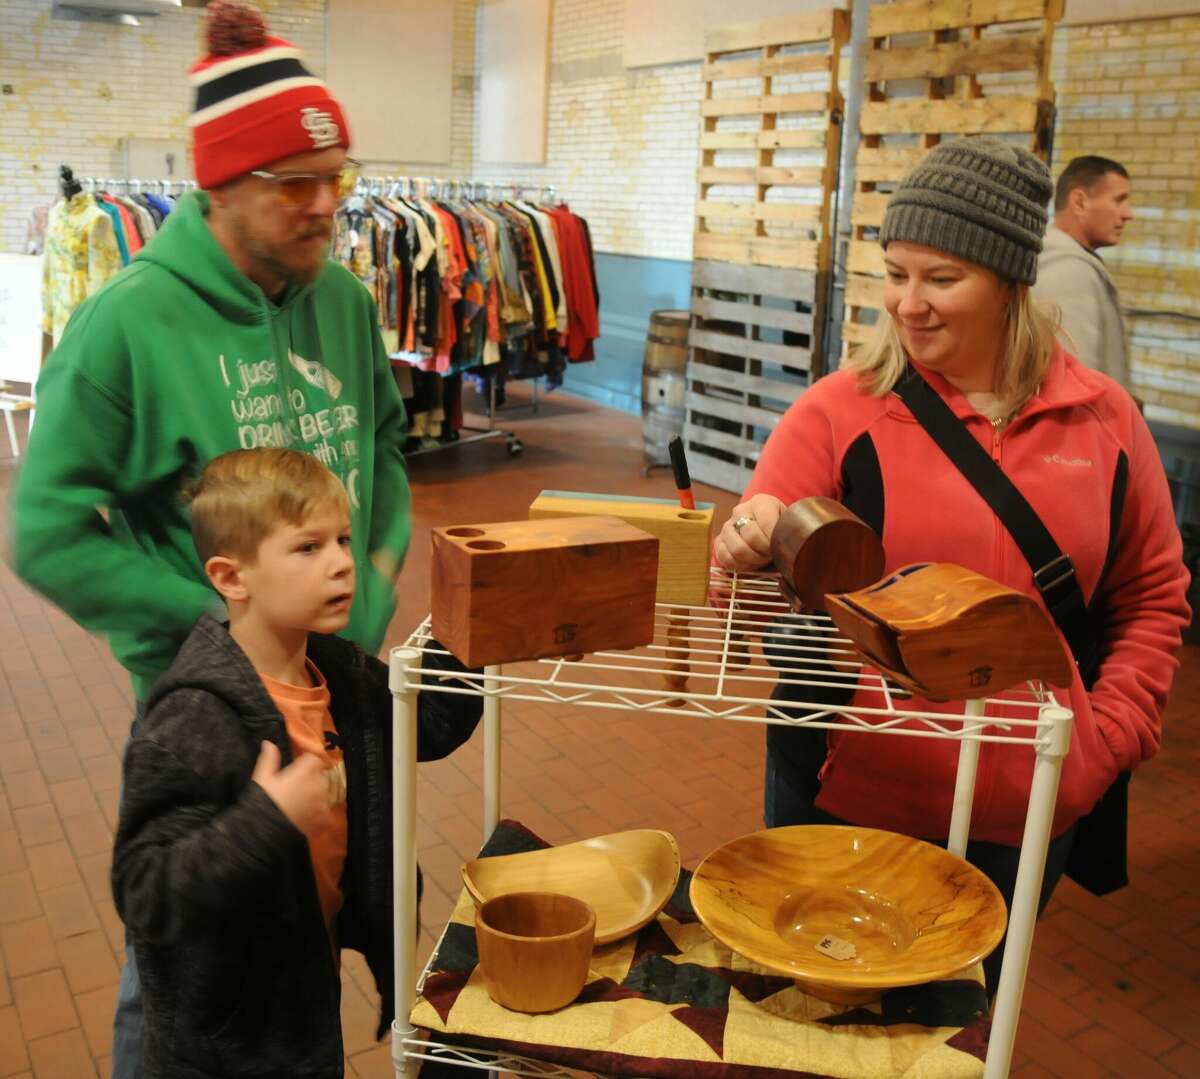 Brittany Biver and son Declan admire the hand-made products at Old Bakery Beer Co. during Saturday's Holiday Cheers Market in Alton.